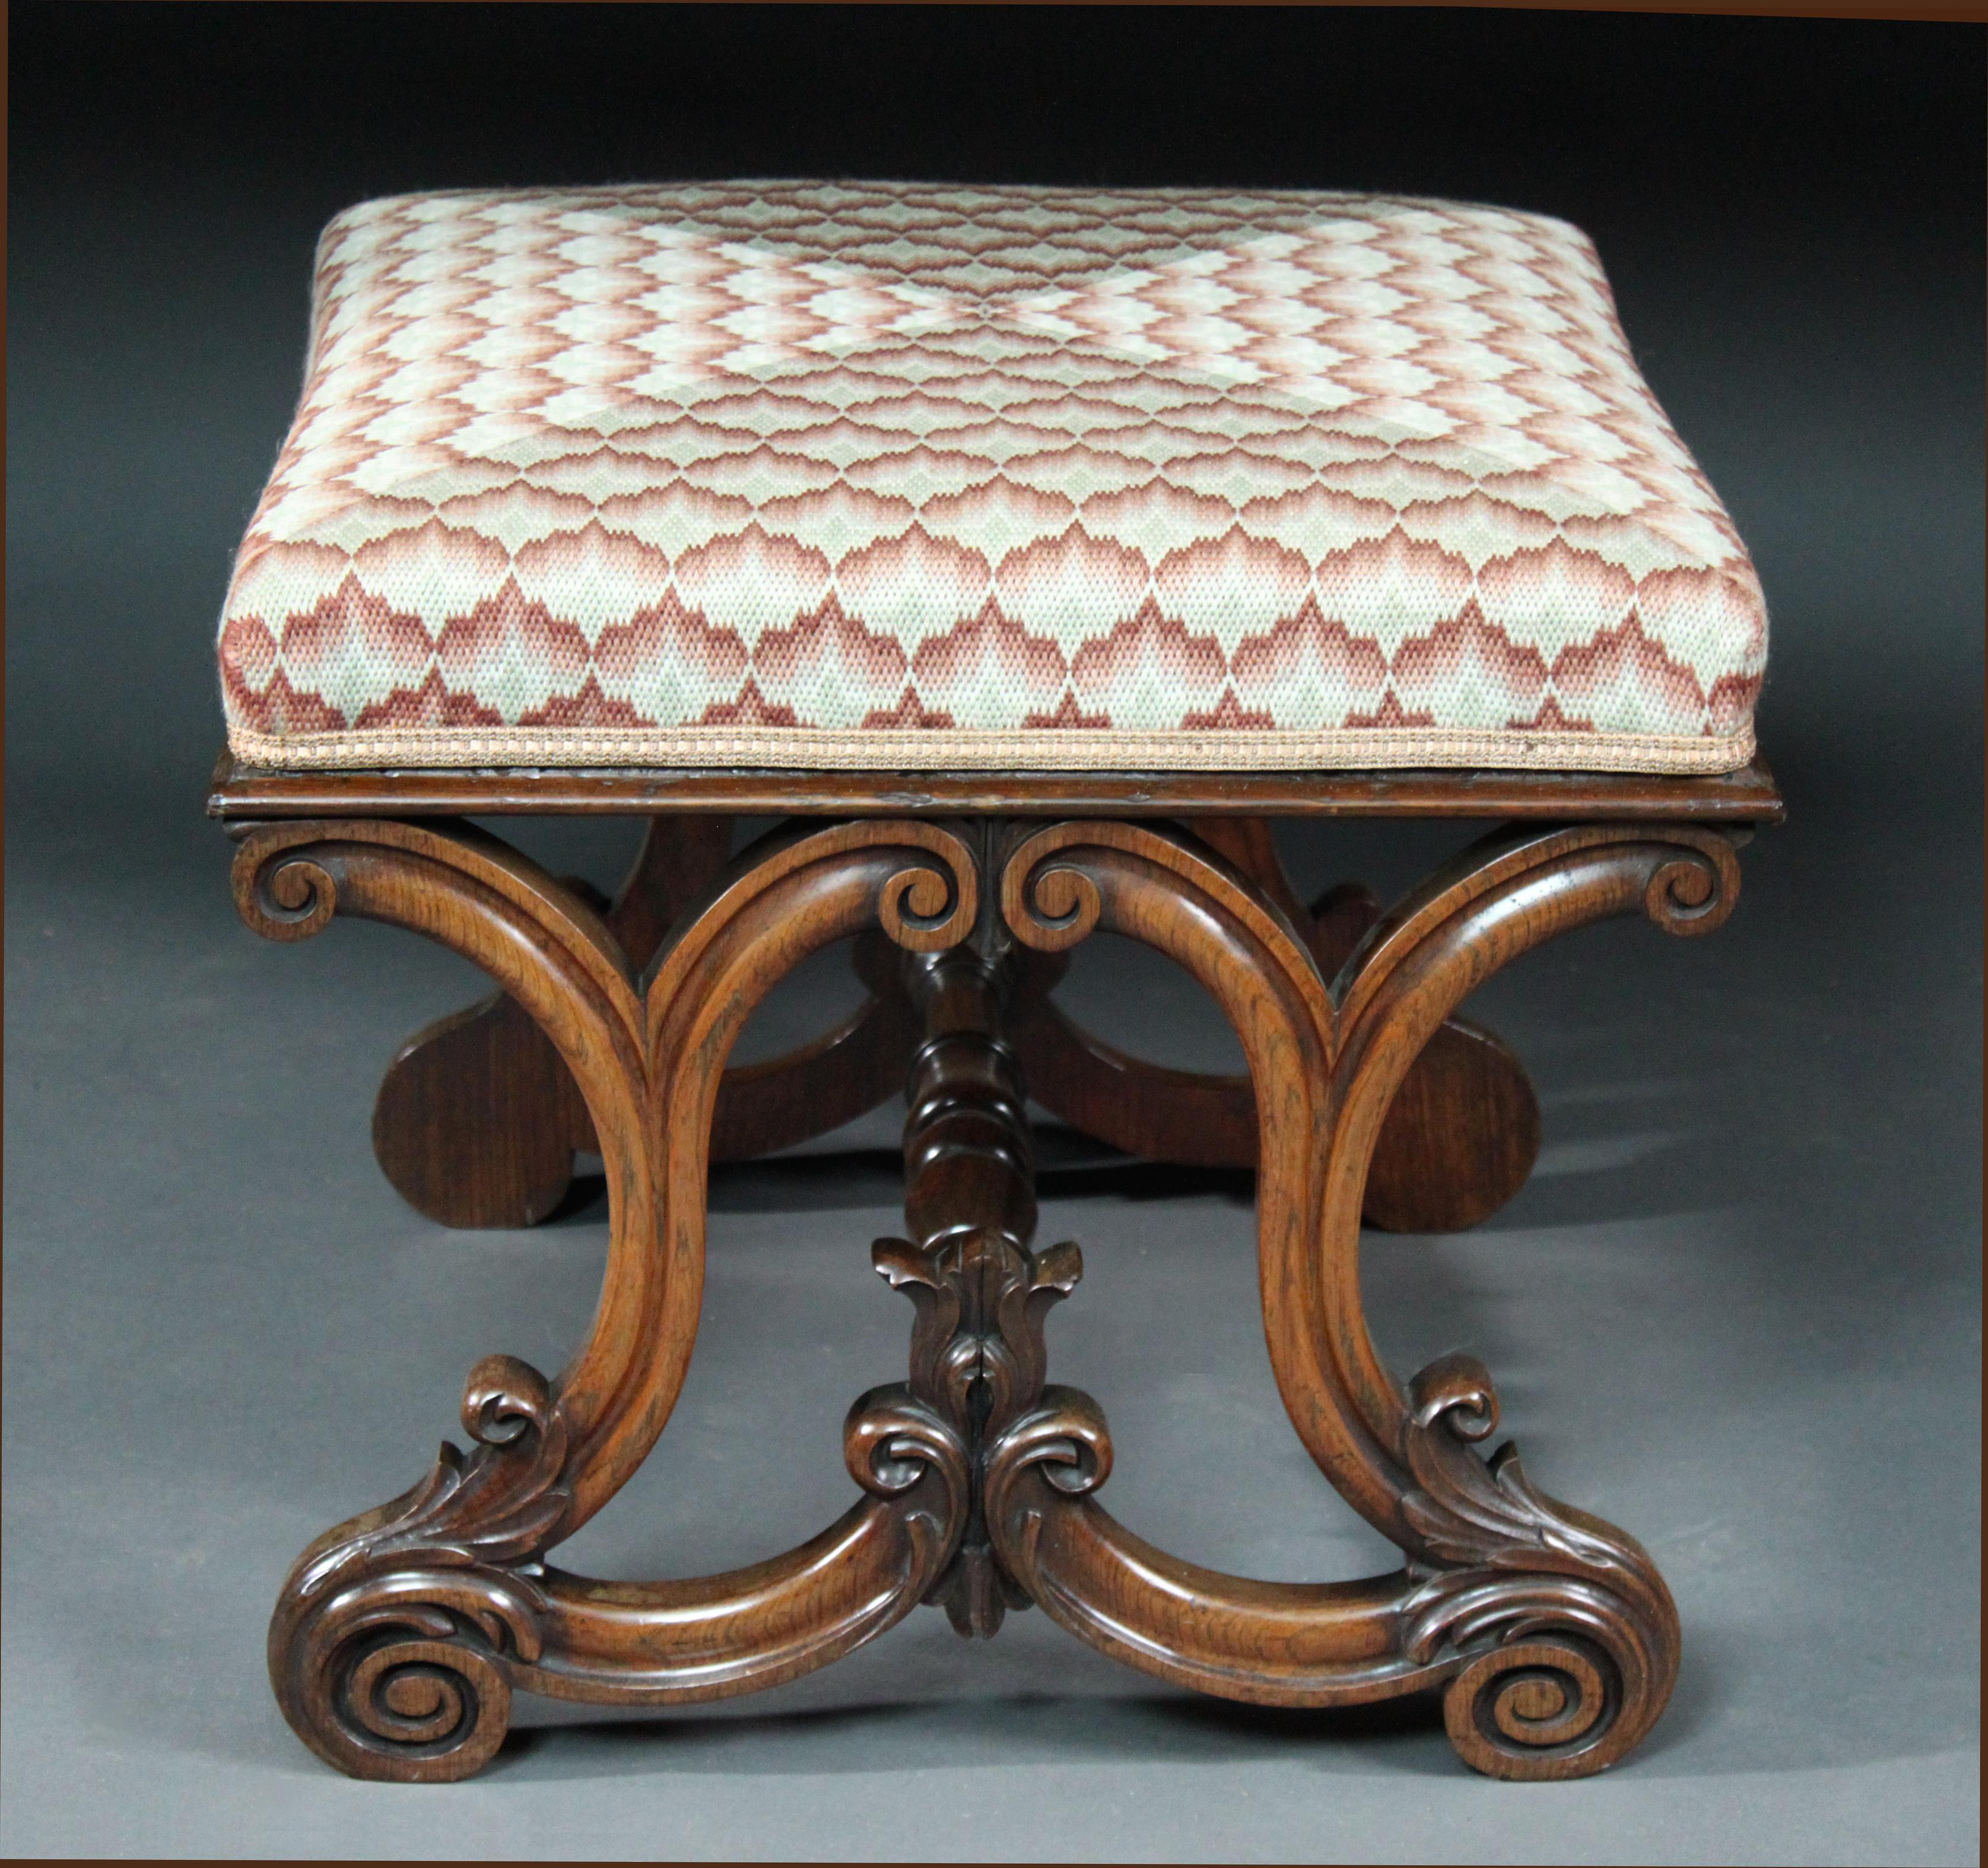 An exceptional late Regency rosewood stool: handome finely carved scrolled ends, larger size than most and well turned stretcher; specially made modern needlework cover.